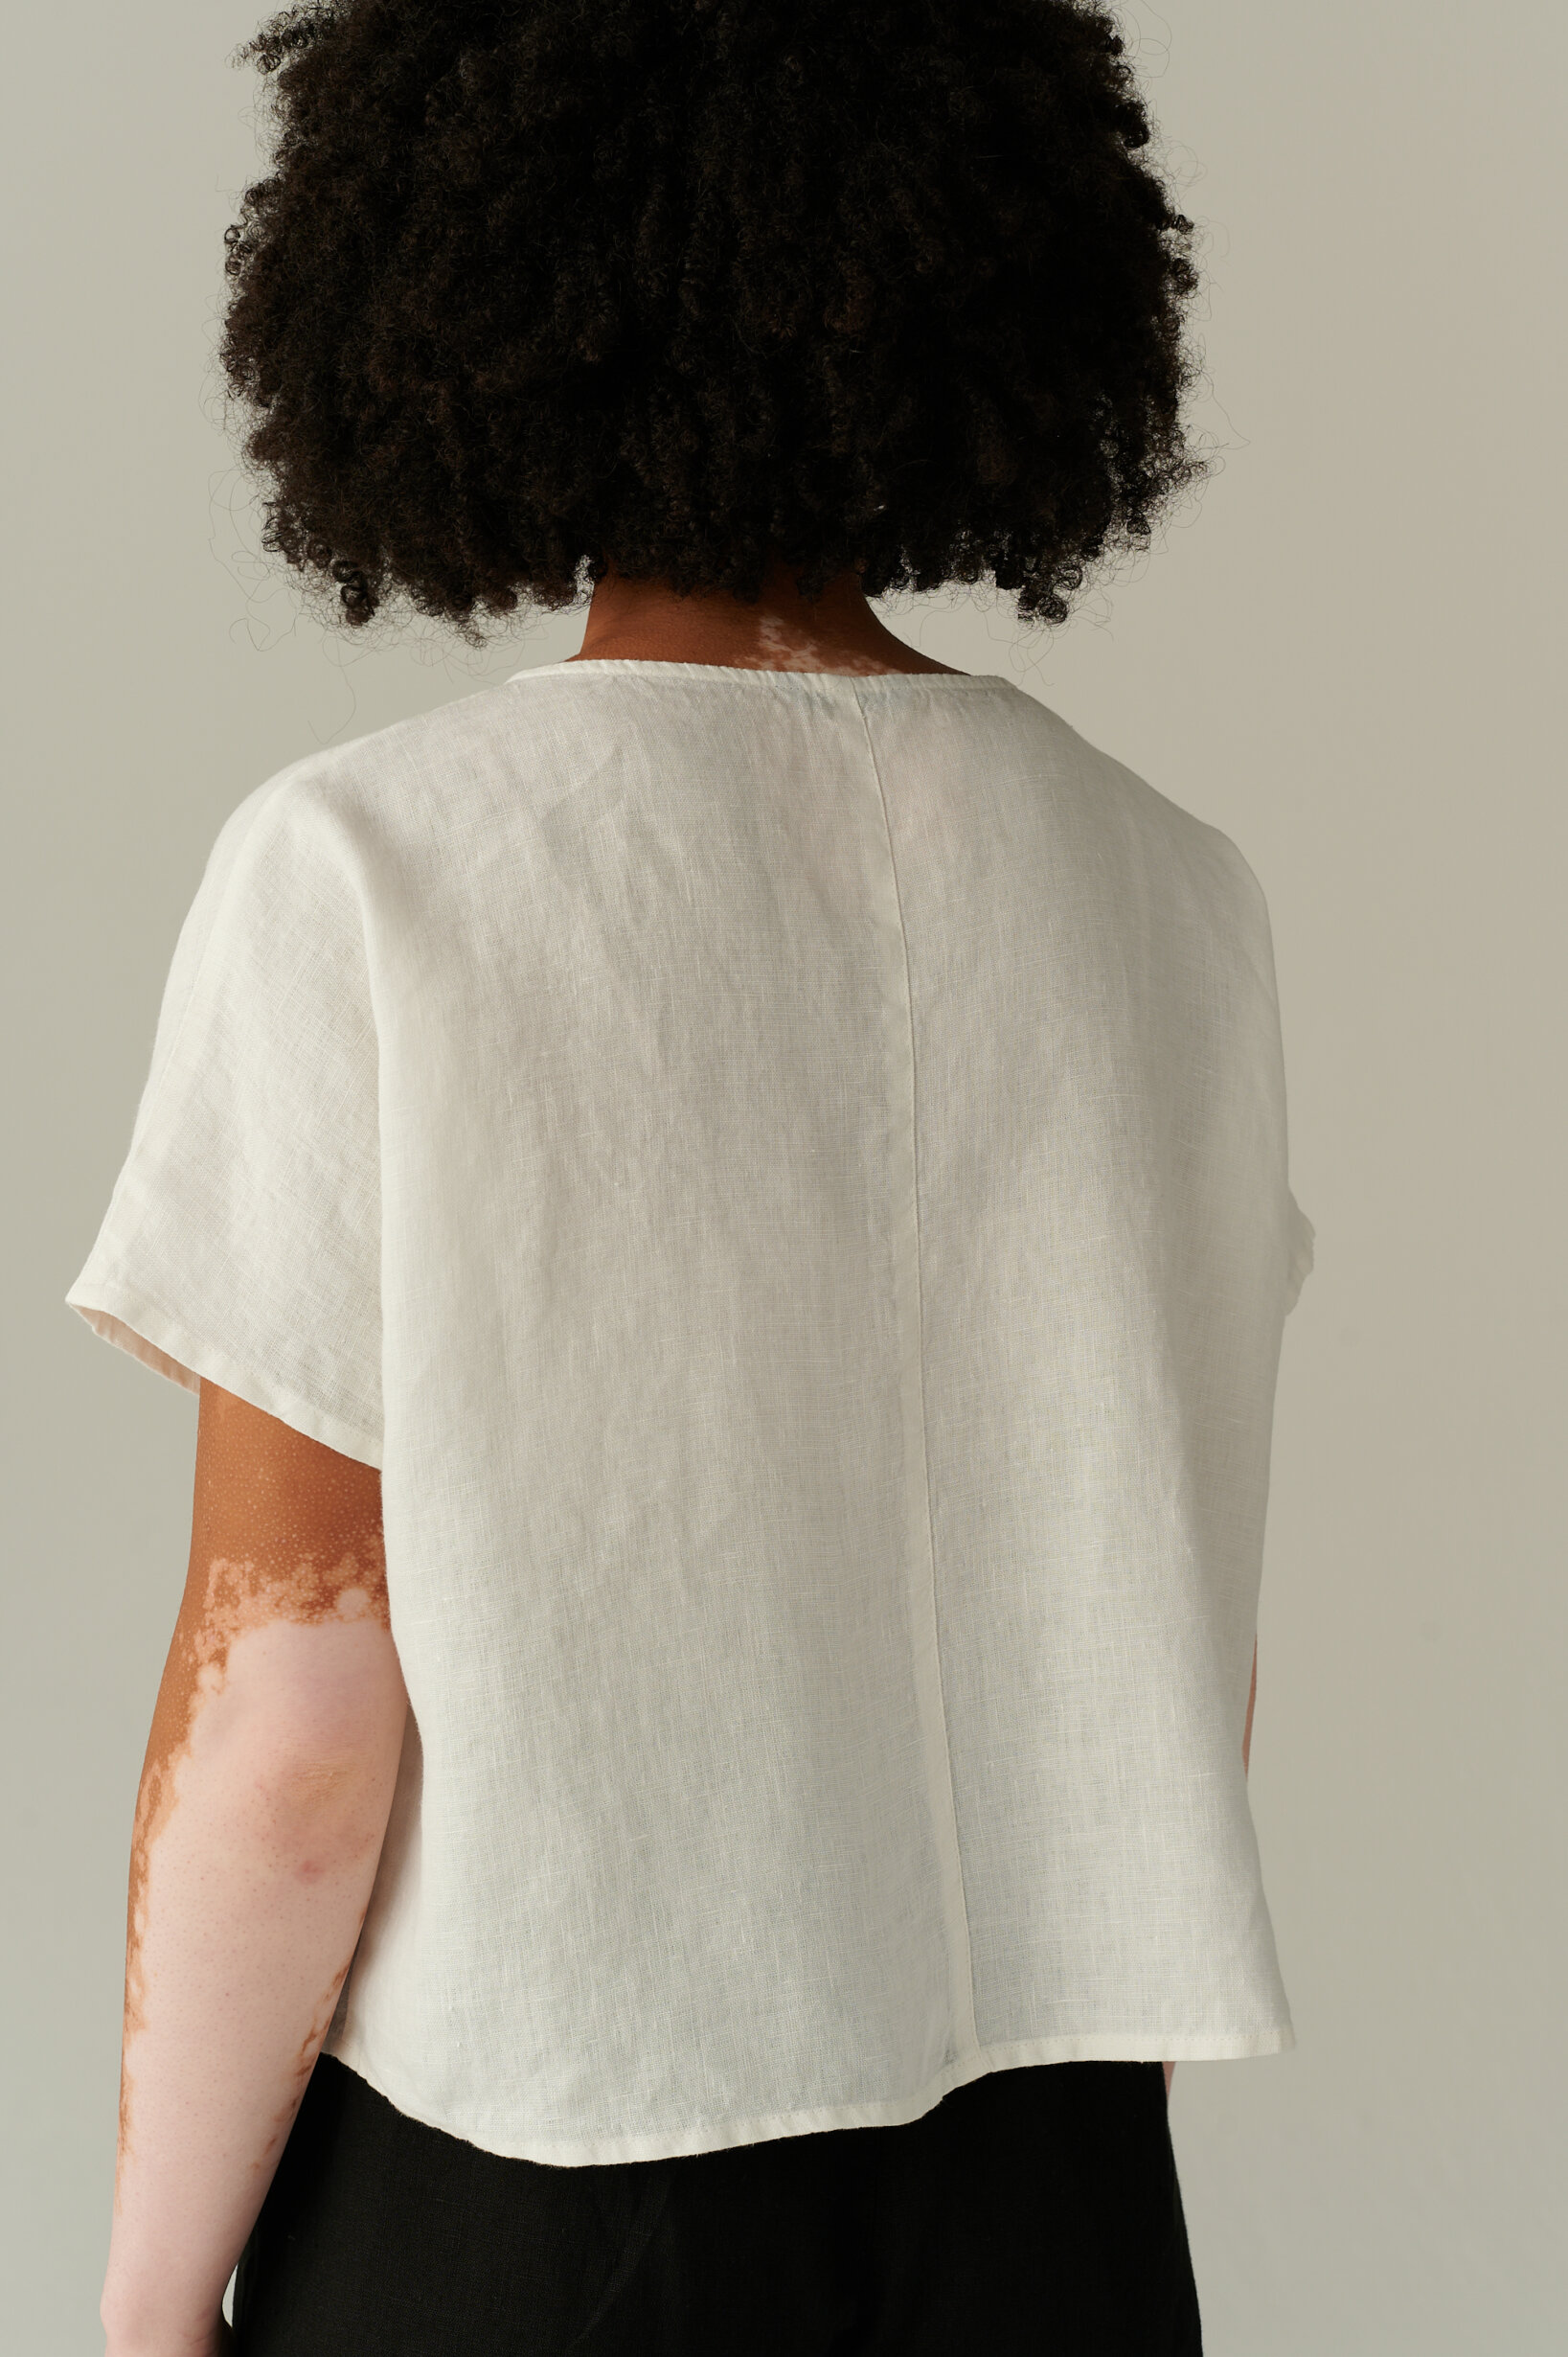 The back view of a loose fitting linen top with a decorative back seam